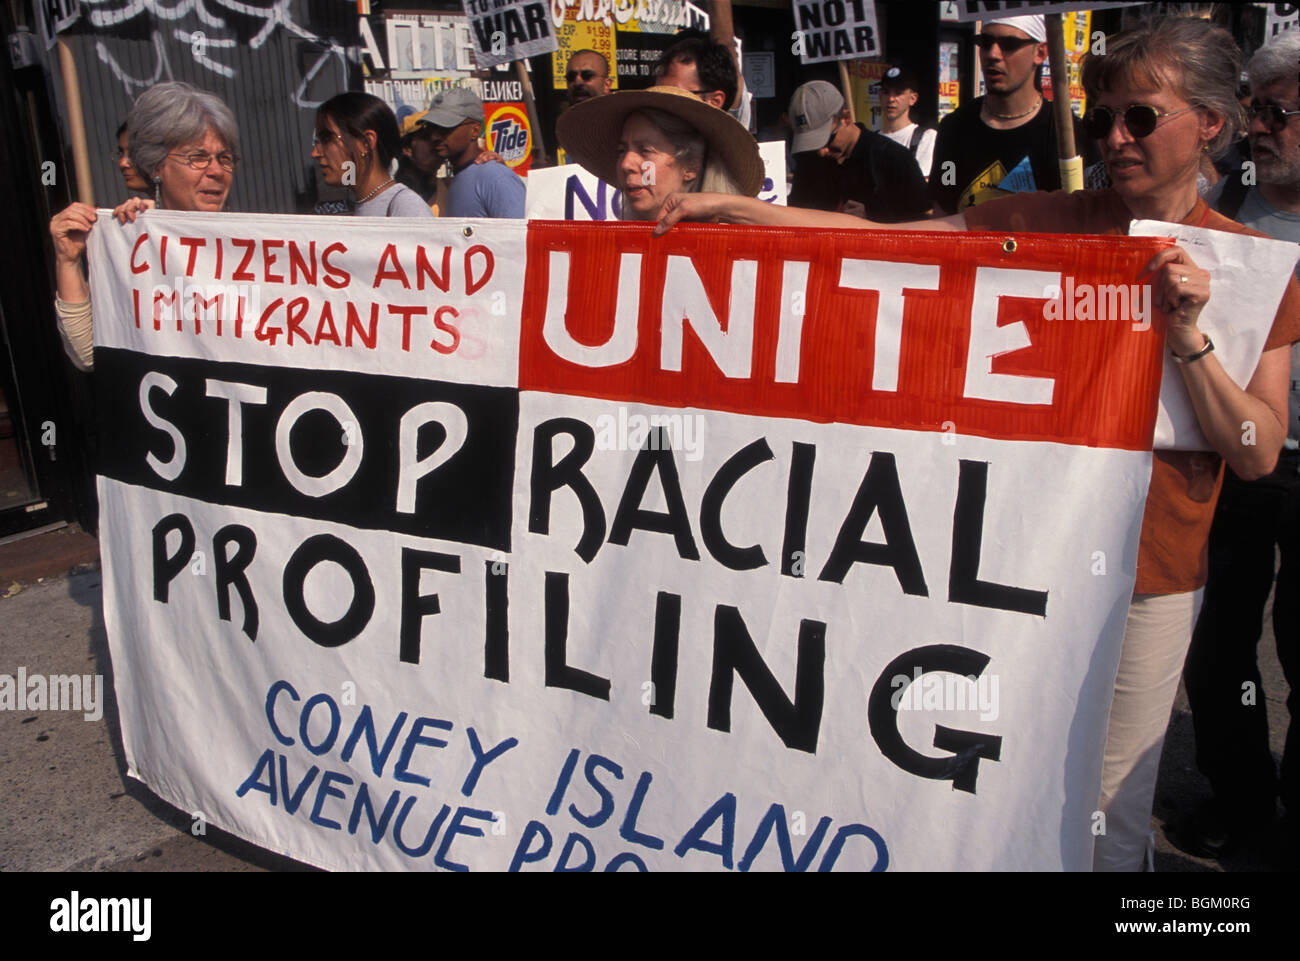 Political rally emphasizing the need to stop racial profiling by the police and other government agencies. Brooklyn, New York. Stock Photo